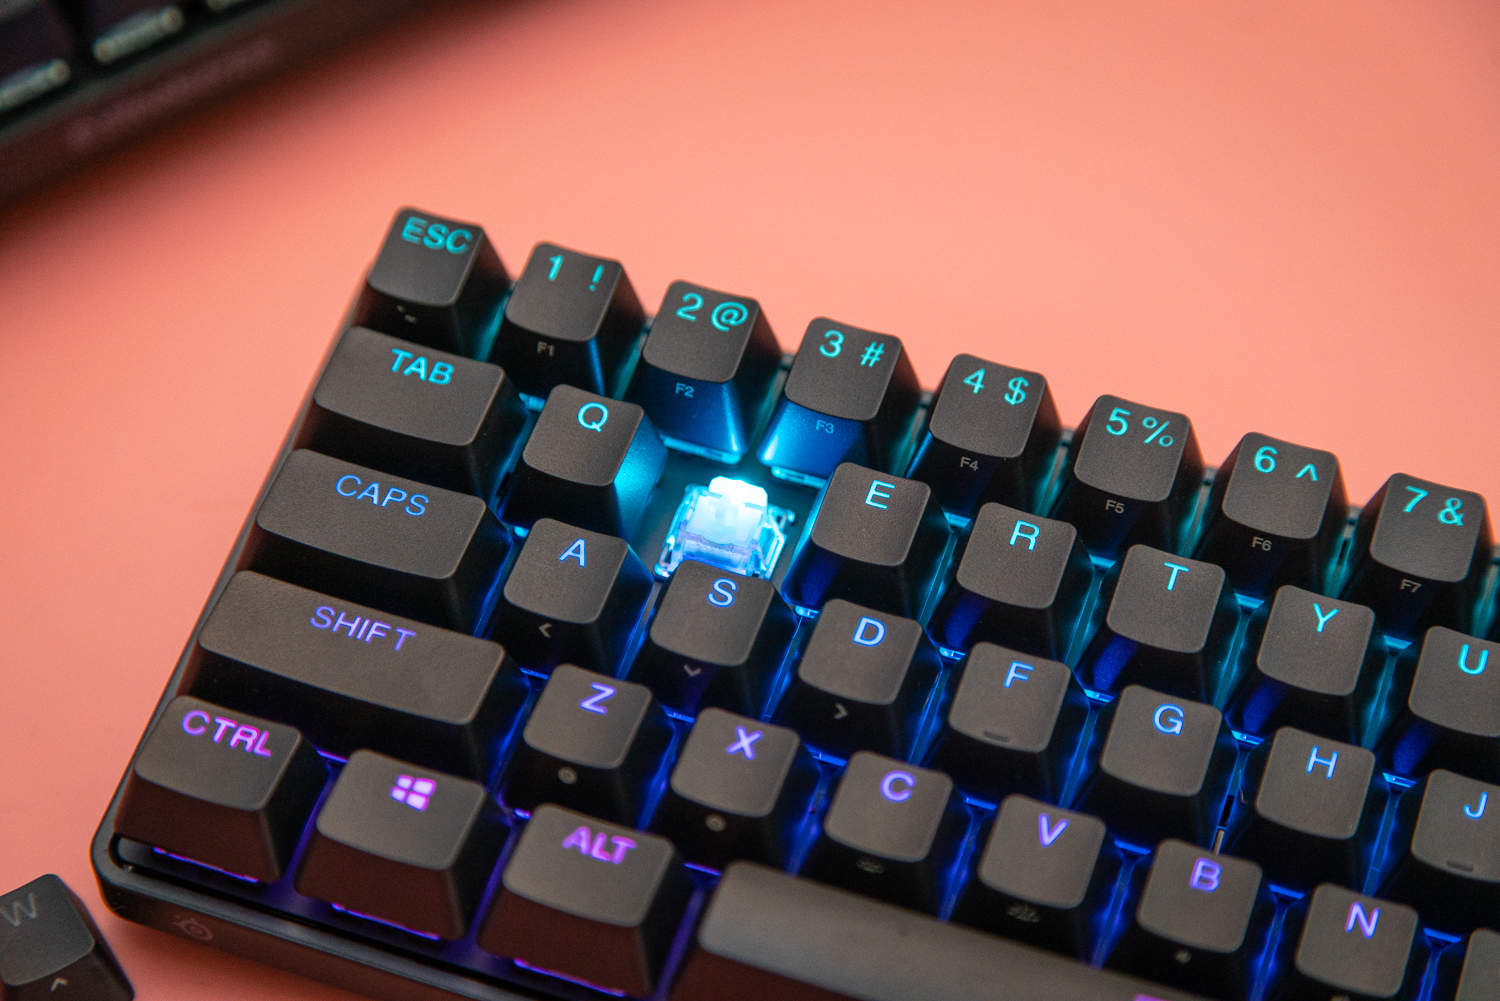 SteelSeries Apex Pro Mini (Wireless) test: Review of the small keyboards